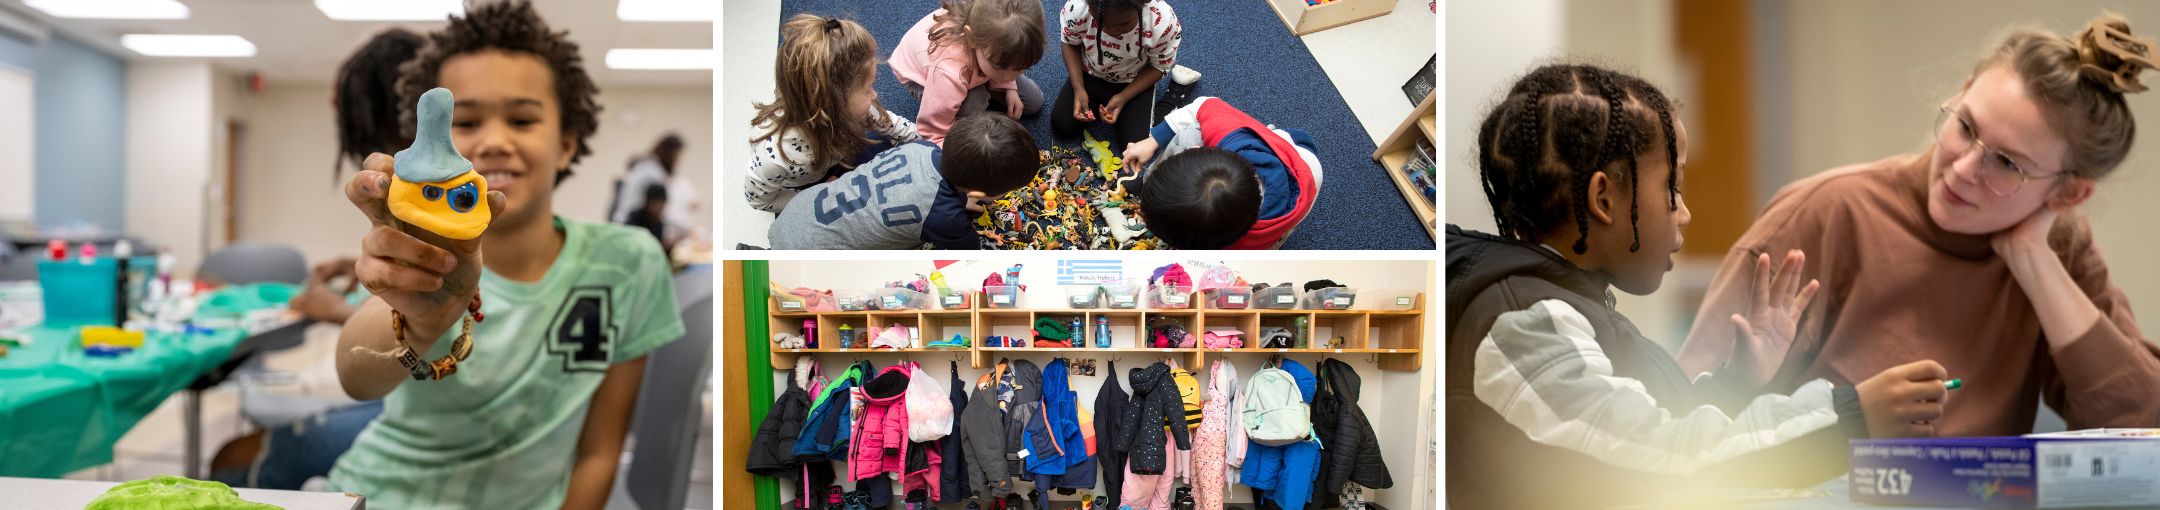 a montage of images of children in classroom settings